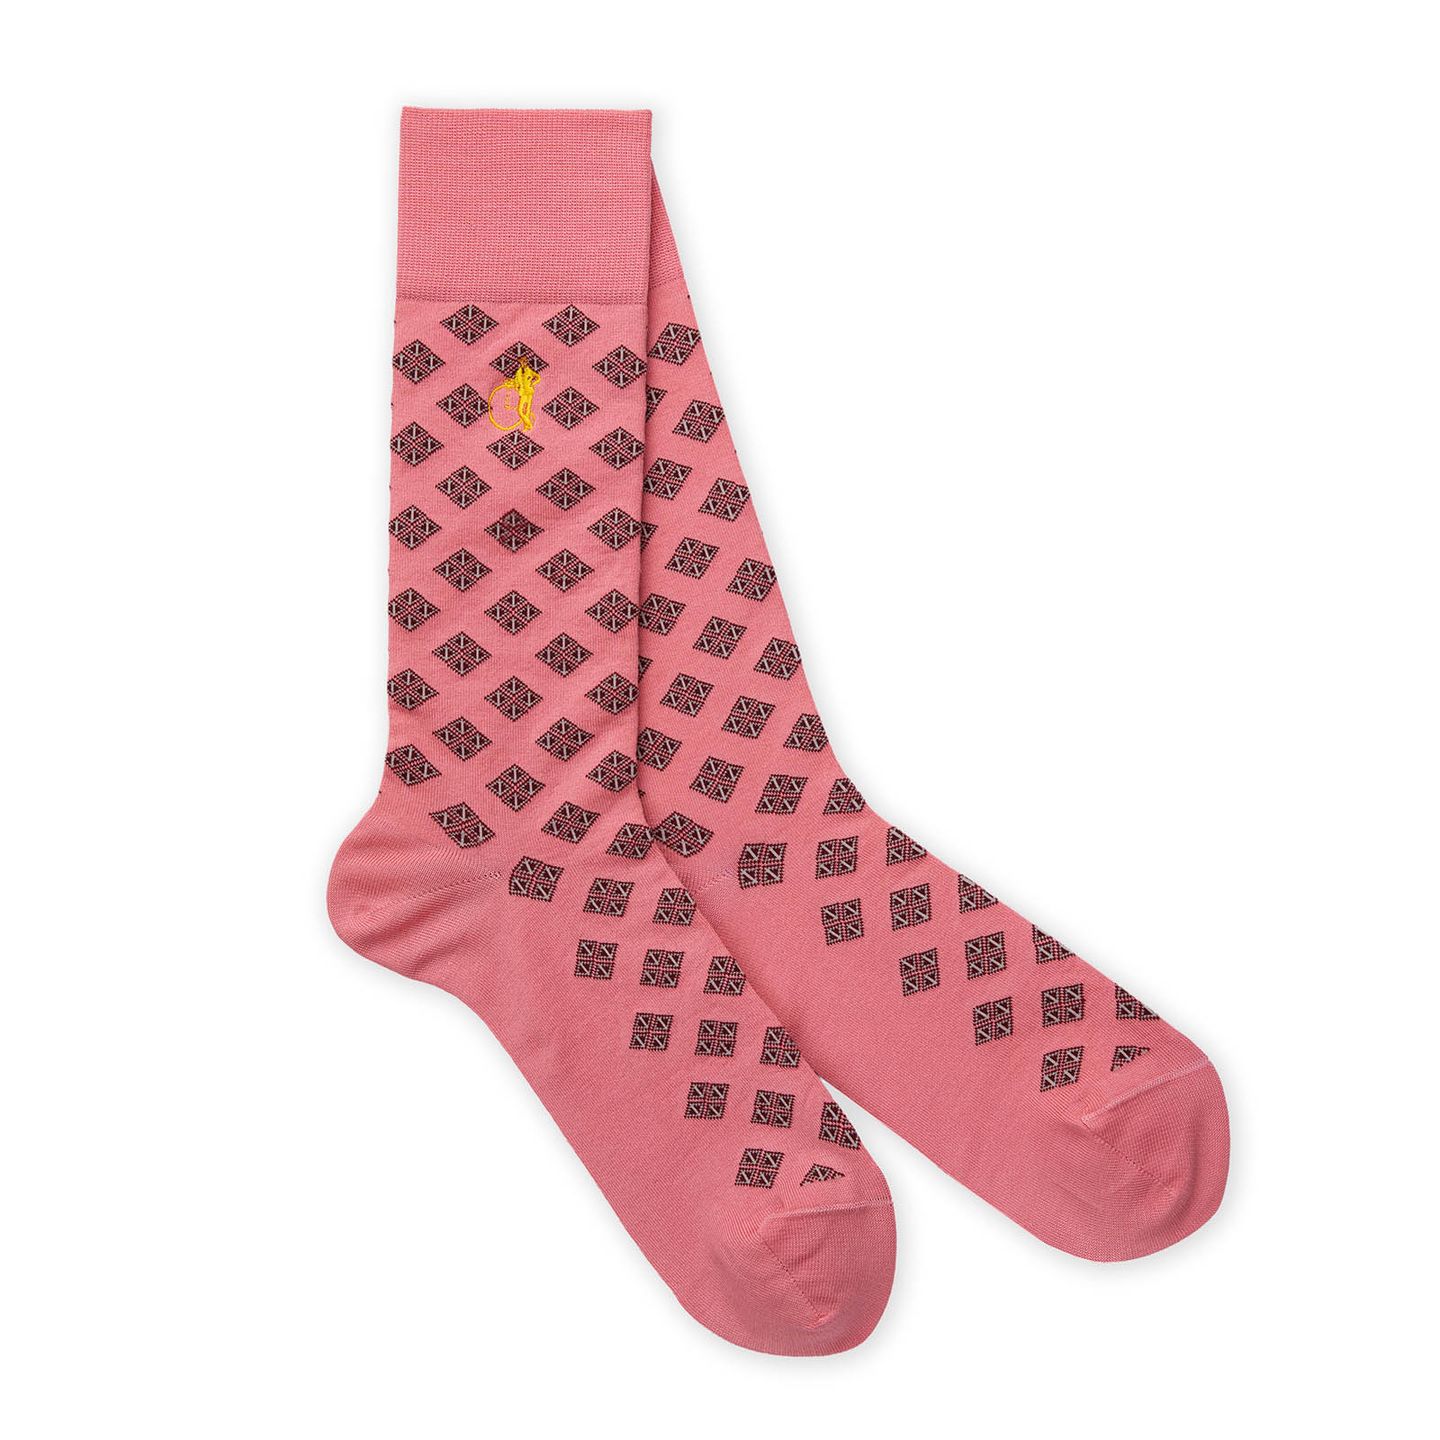 Pink socks with black and white diamond patterns